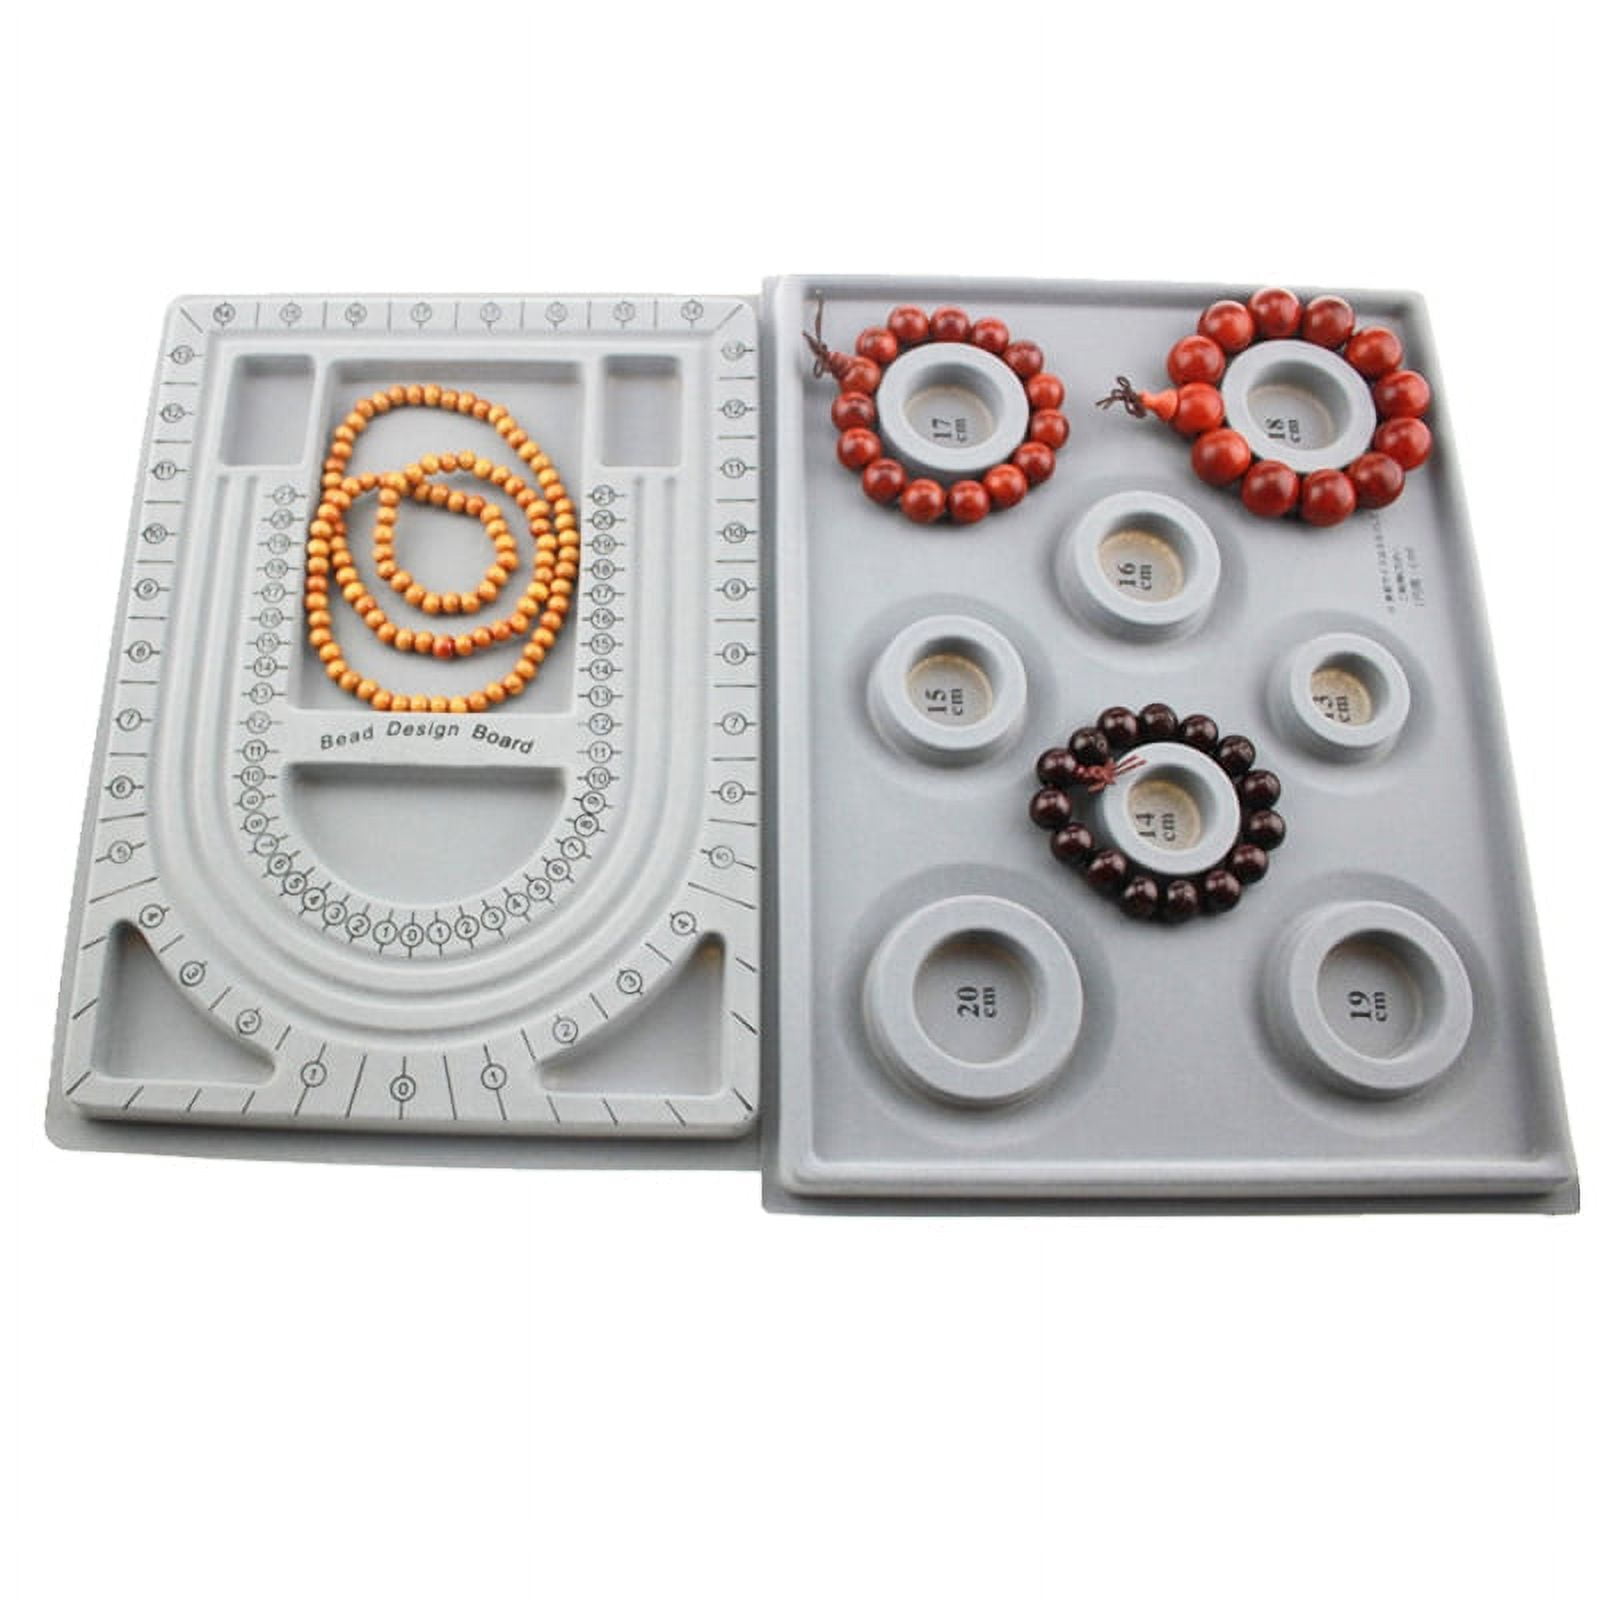 Bead Board, Design Boards Flocked Bracelet Beads Storage Beading Jewelry  Making Organizer Tray Kit Cover Supplies Creating Trays Bracelets Necklaces